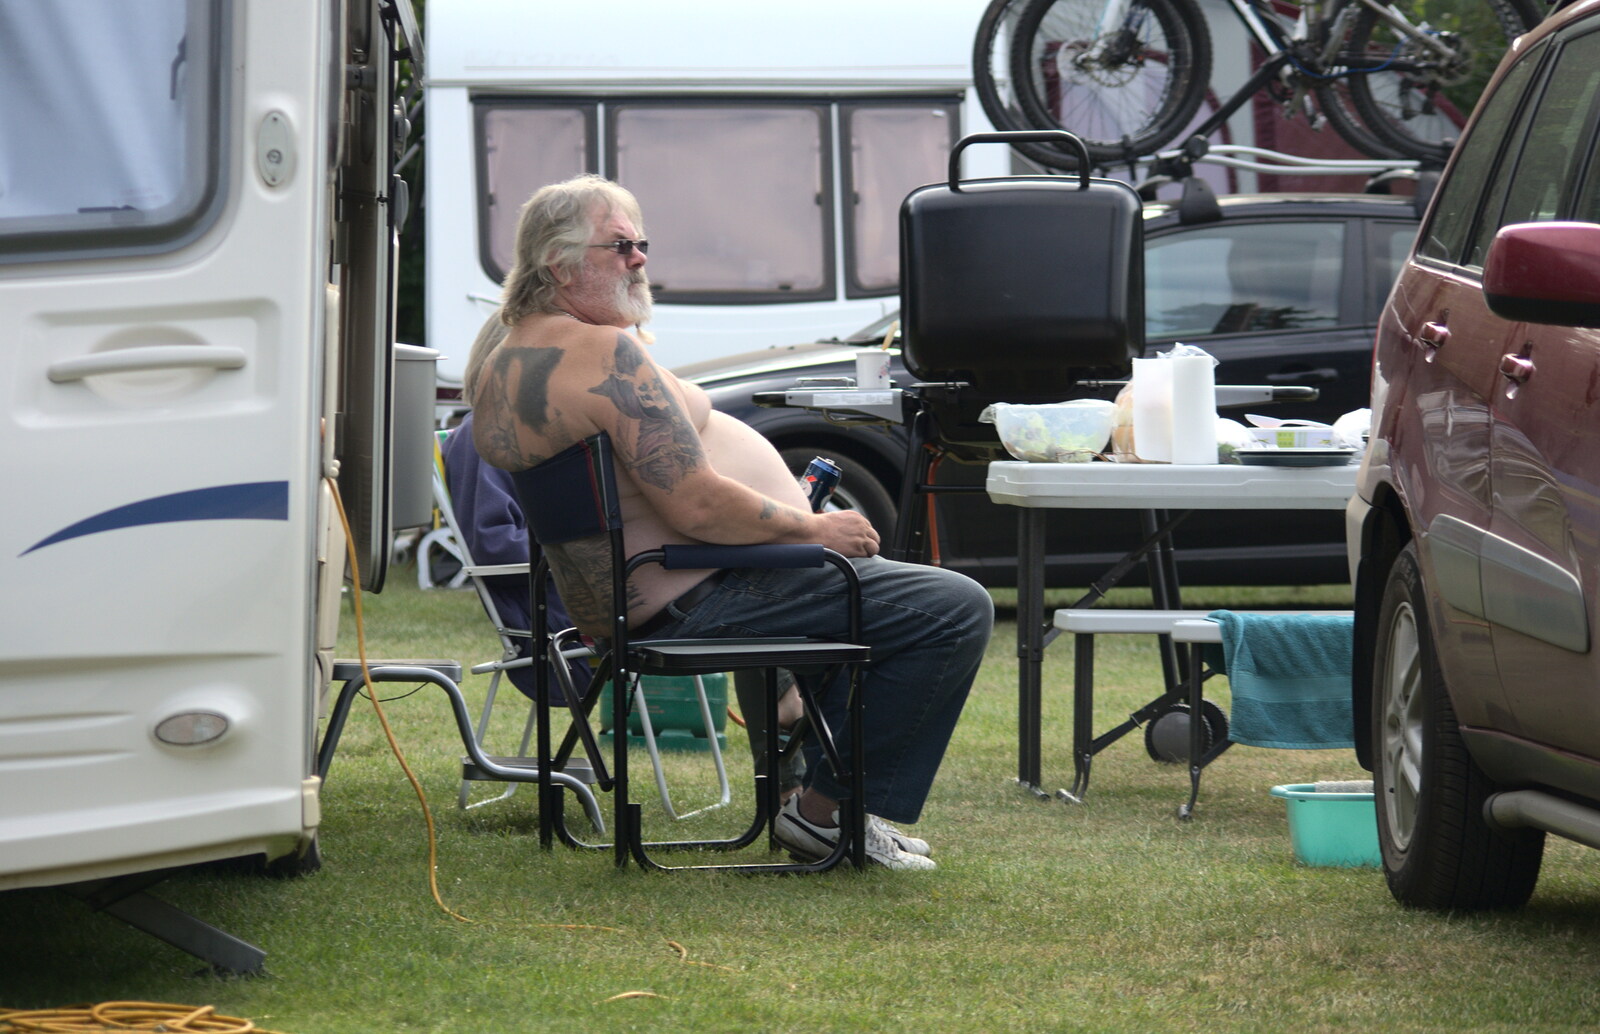 A tattooed dude does a can of Kronenbourg from A Weekend in the Camper Van, West Harling, Norfolk - 21st June 2014